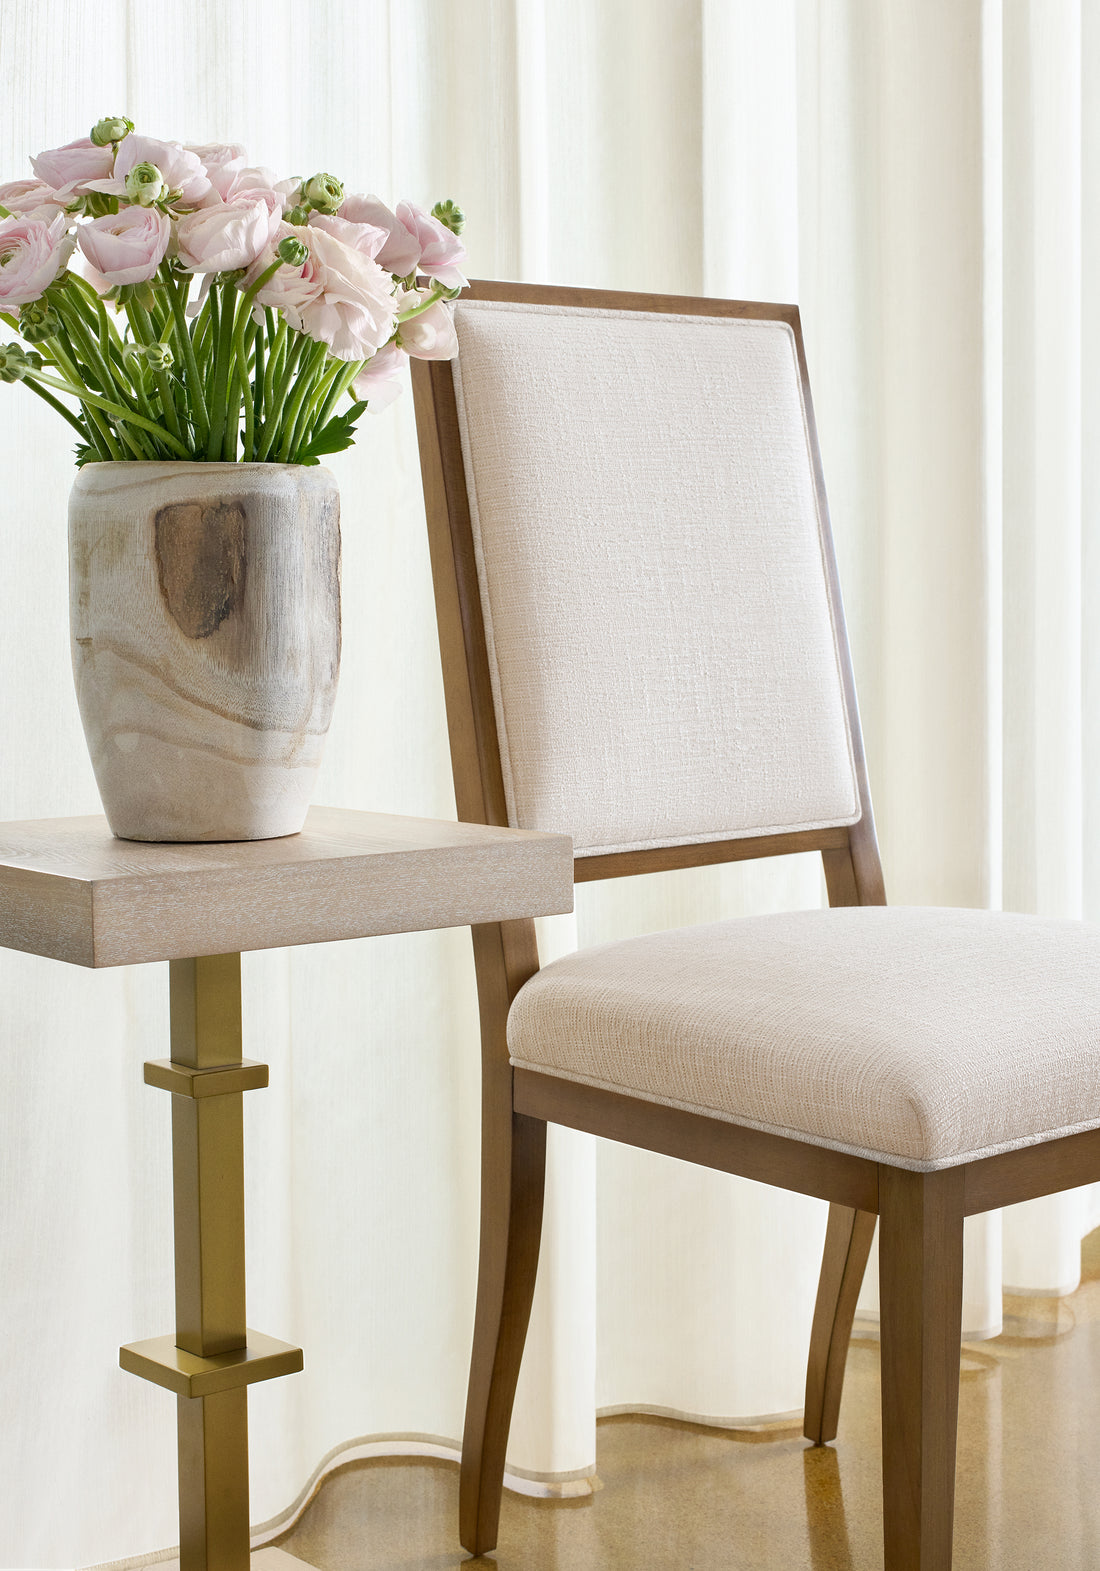 Lauderdale Dining Chair in Piper woven fabric in flax color - pattern number W73440 by Thibaut in the Landmark Textures collection